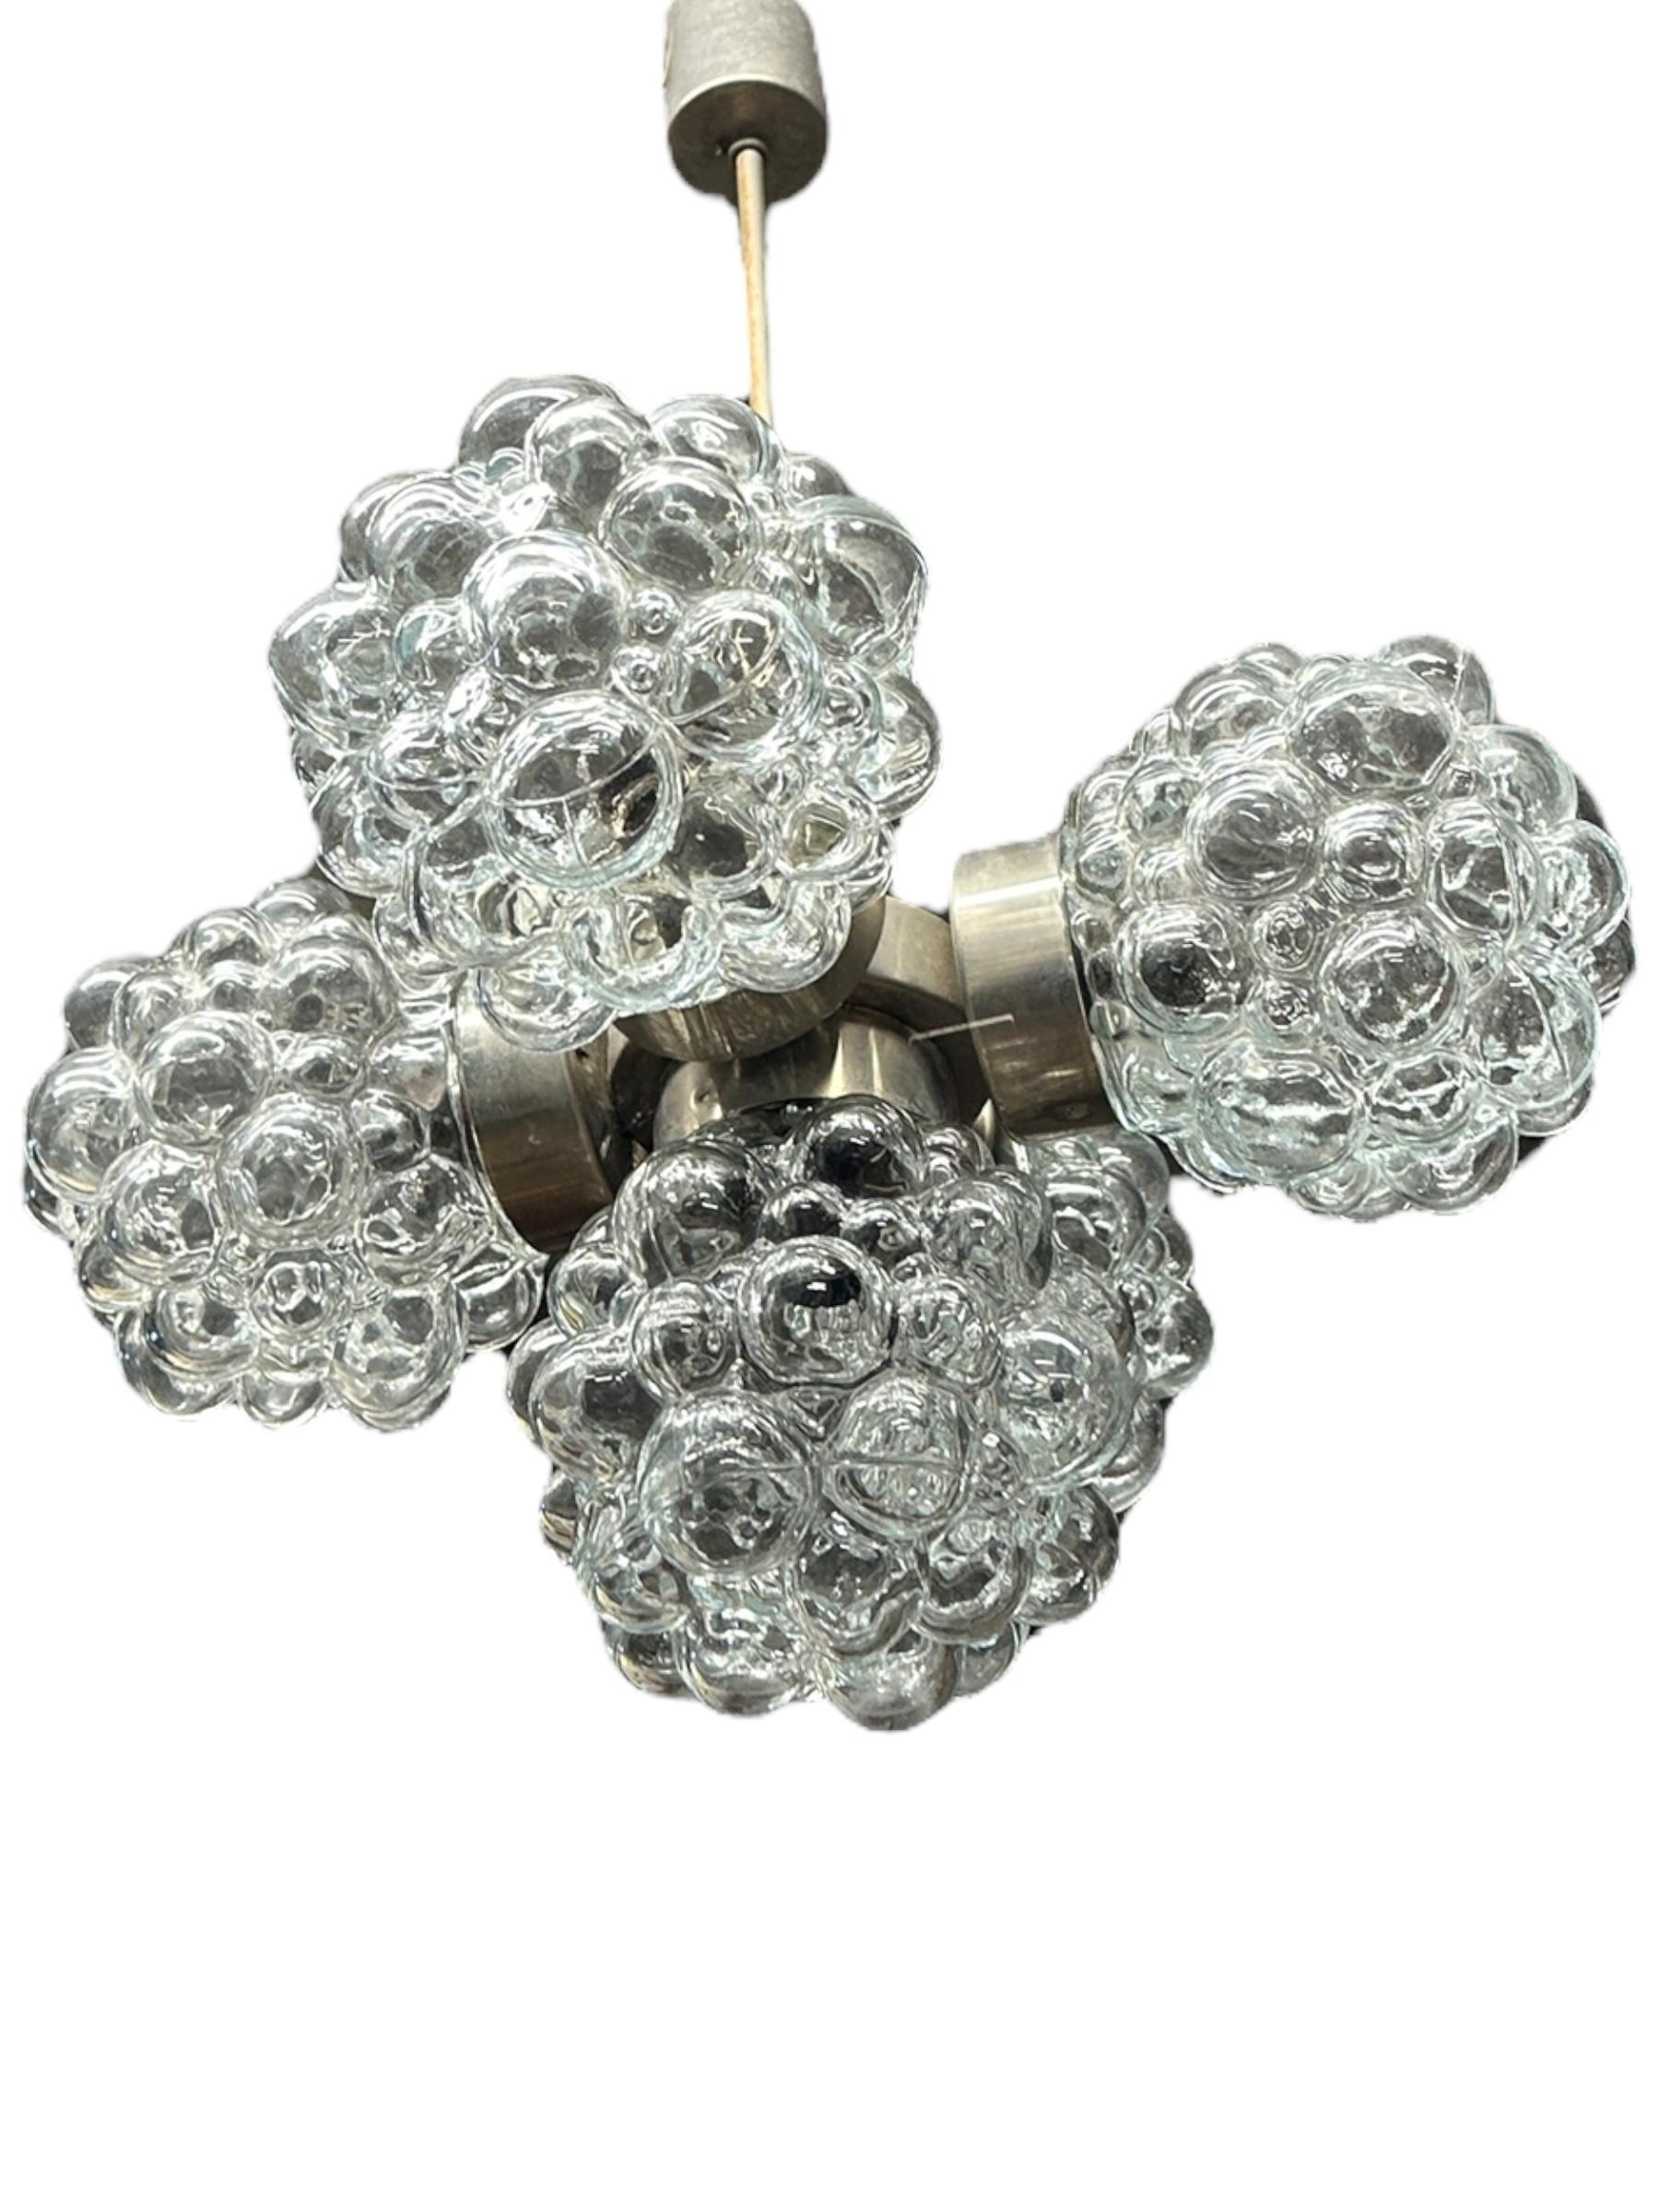 5 Light Bubble Glass Helena Tynell Style Chandelier, Austria 1960s For Sale 7